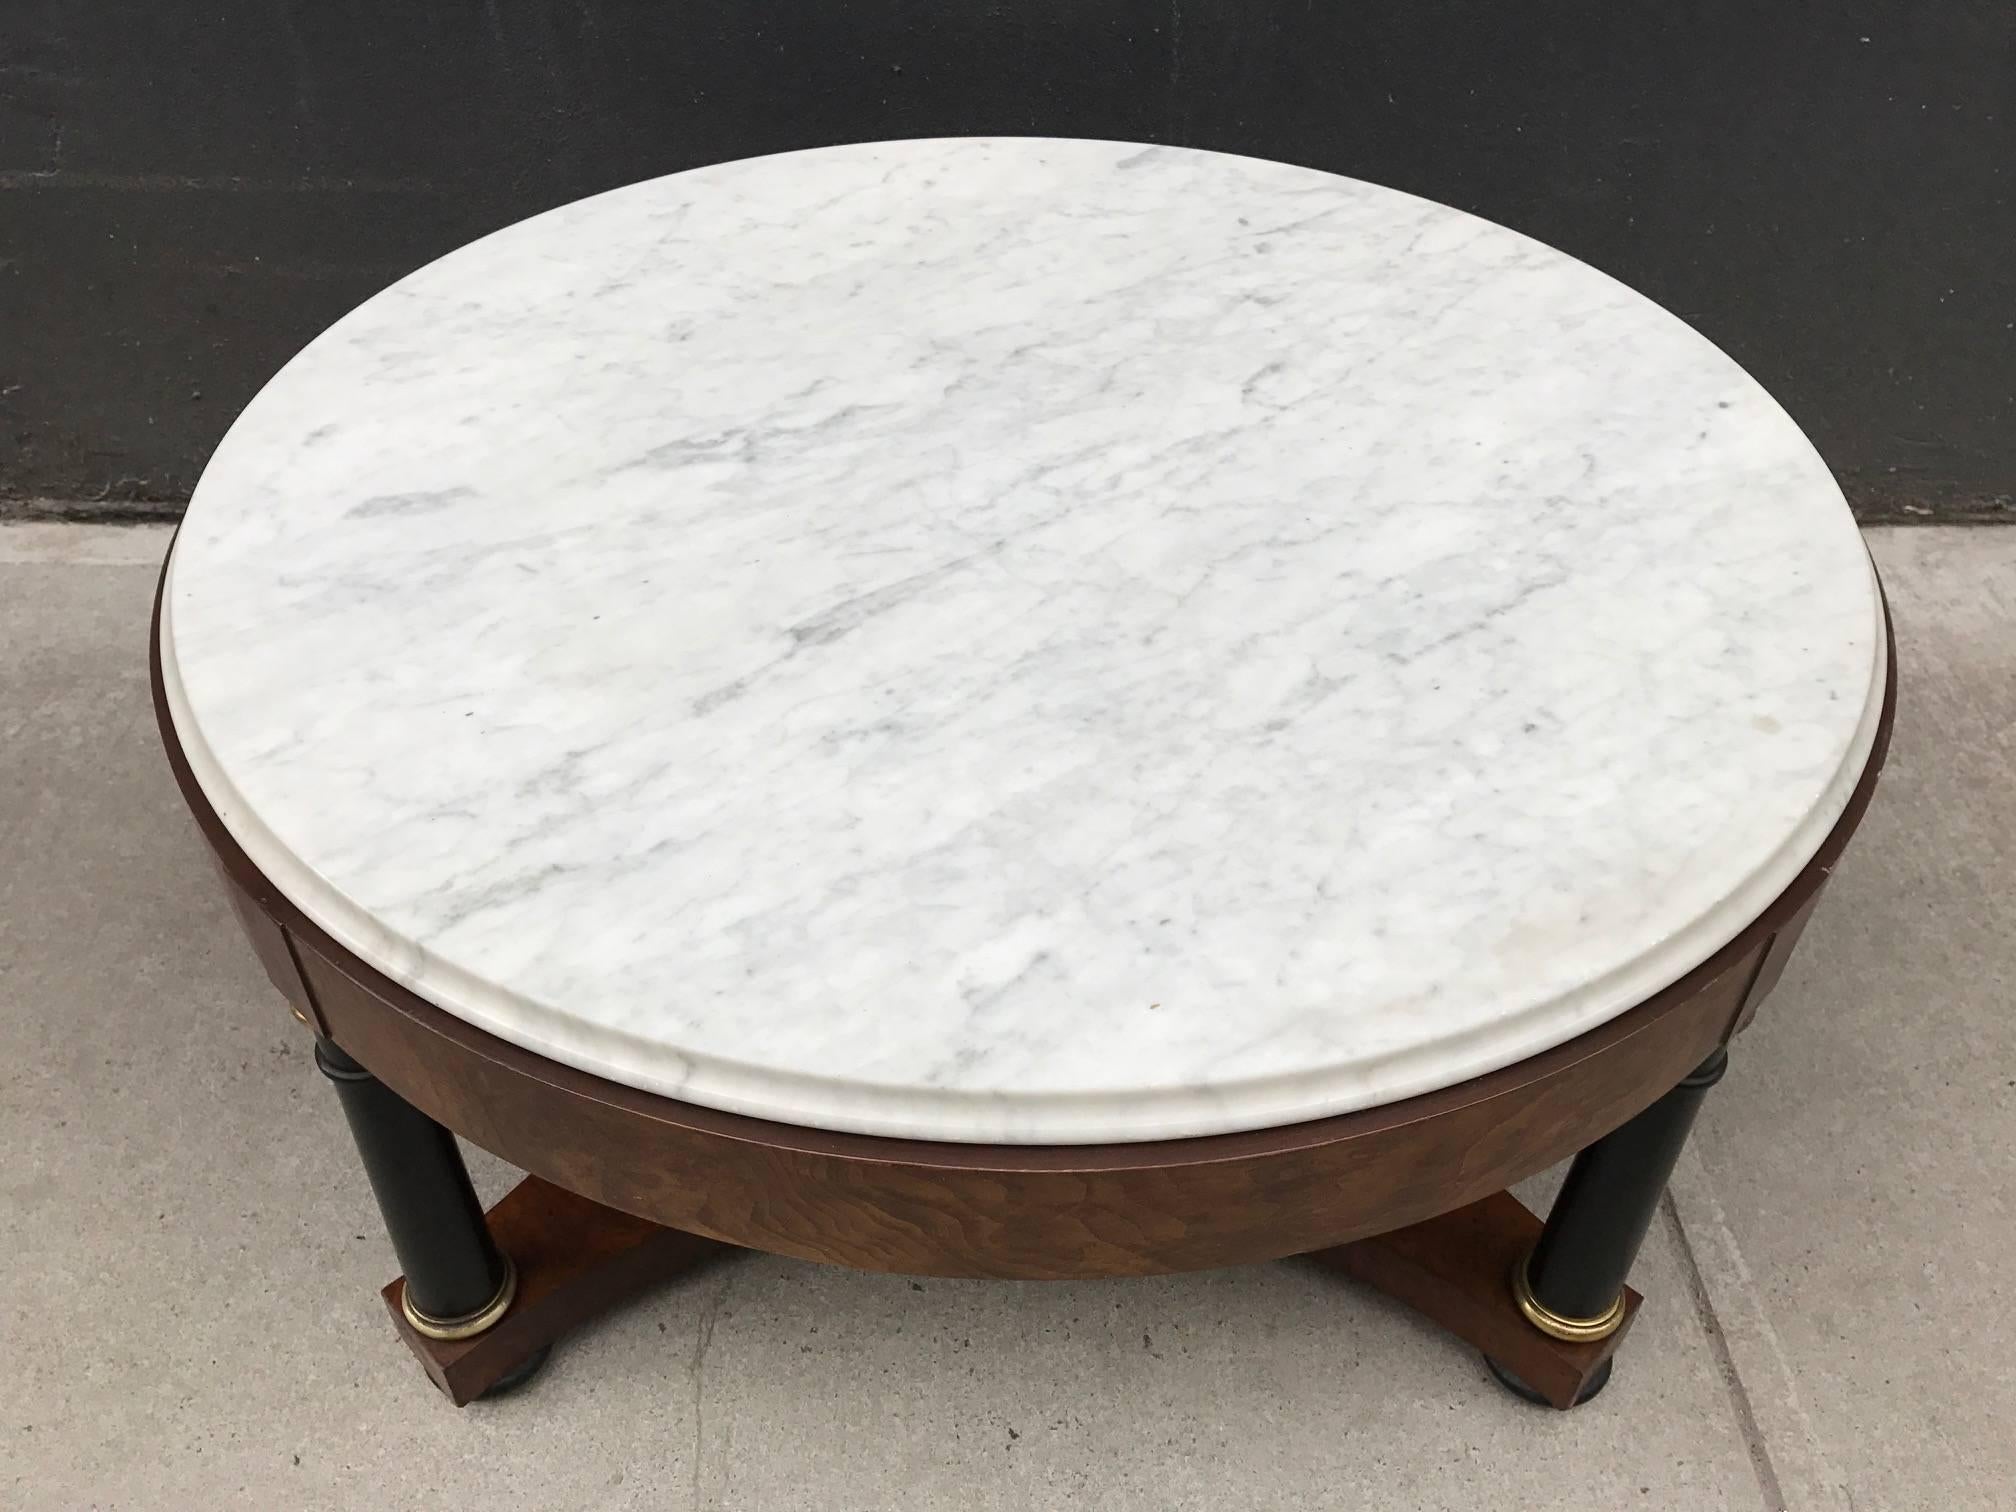 Regency Marble Top Coffee Table by Baker with Black Lacquered Columns